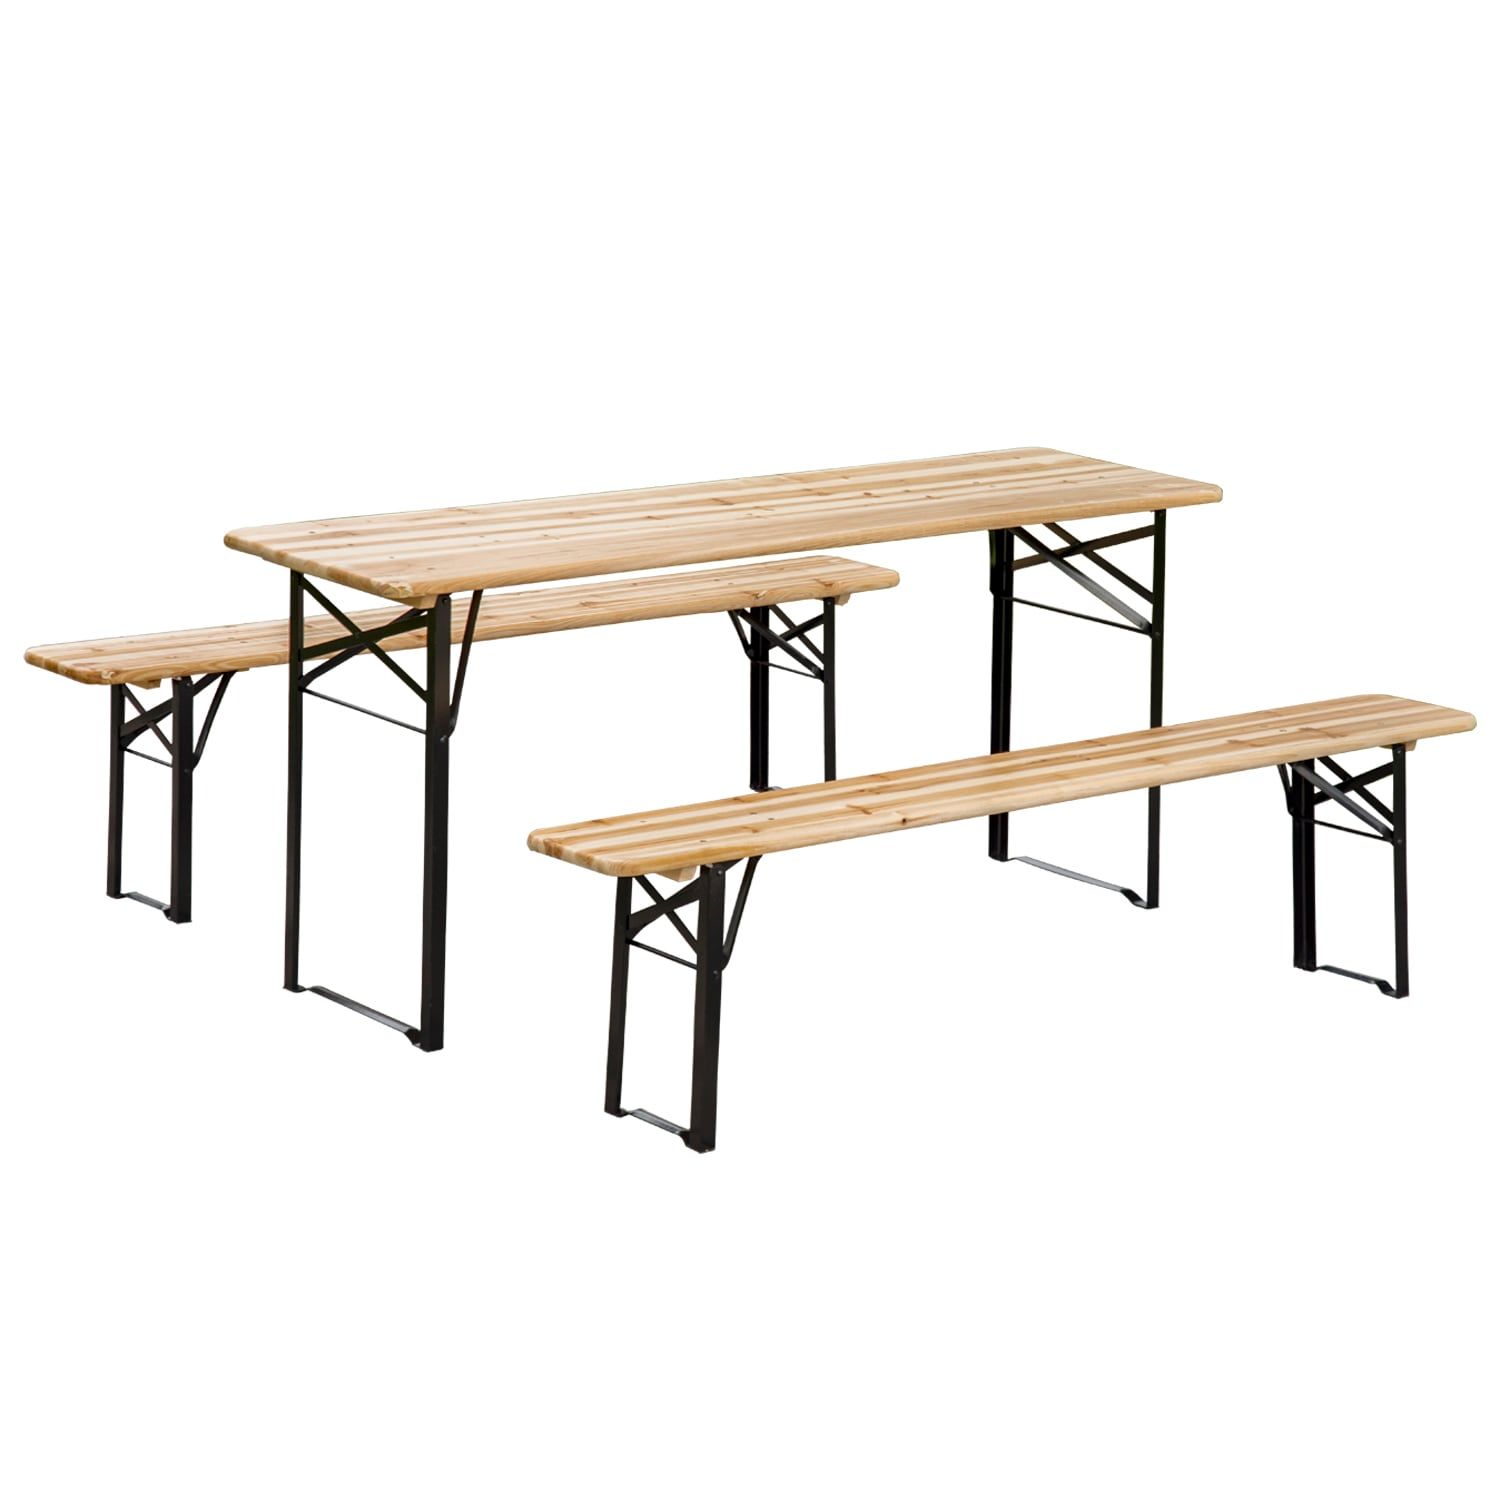 Wooden Outdoor Folding Picnic Table Set